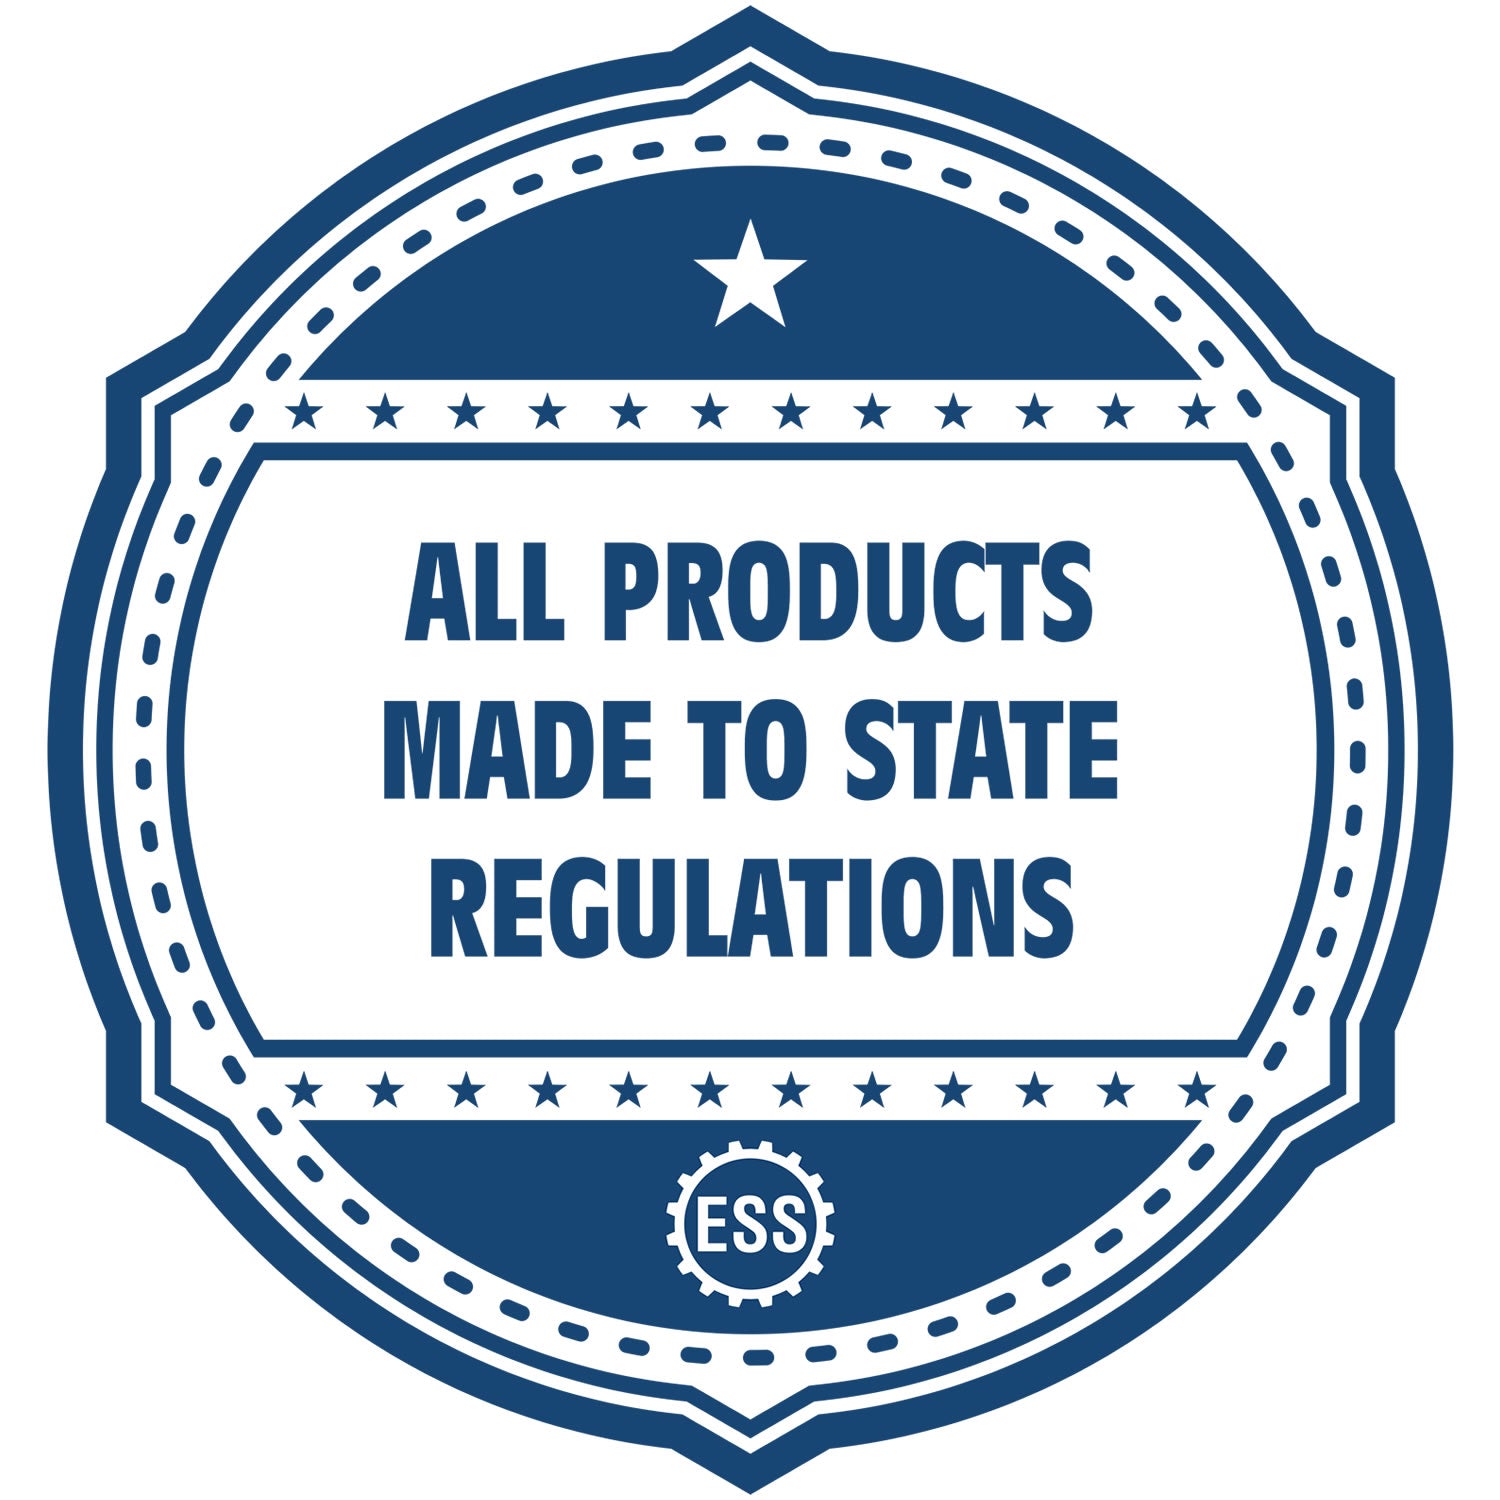 An icon or badge element for the State of Wisconsin Extended Long Reach Engineer Seal showing that this product is made in compliance with state regulations.